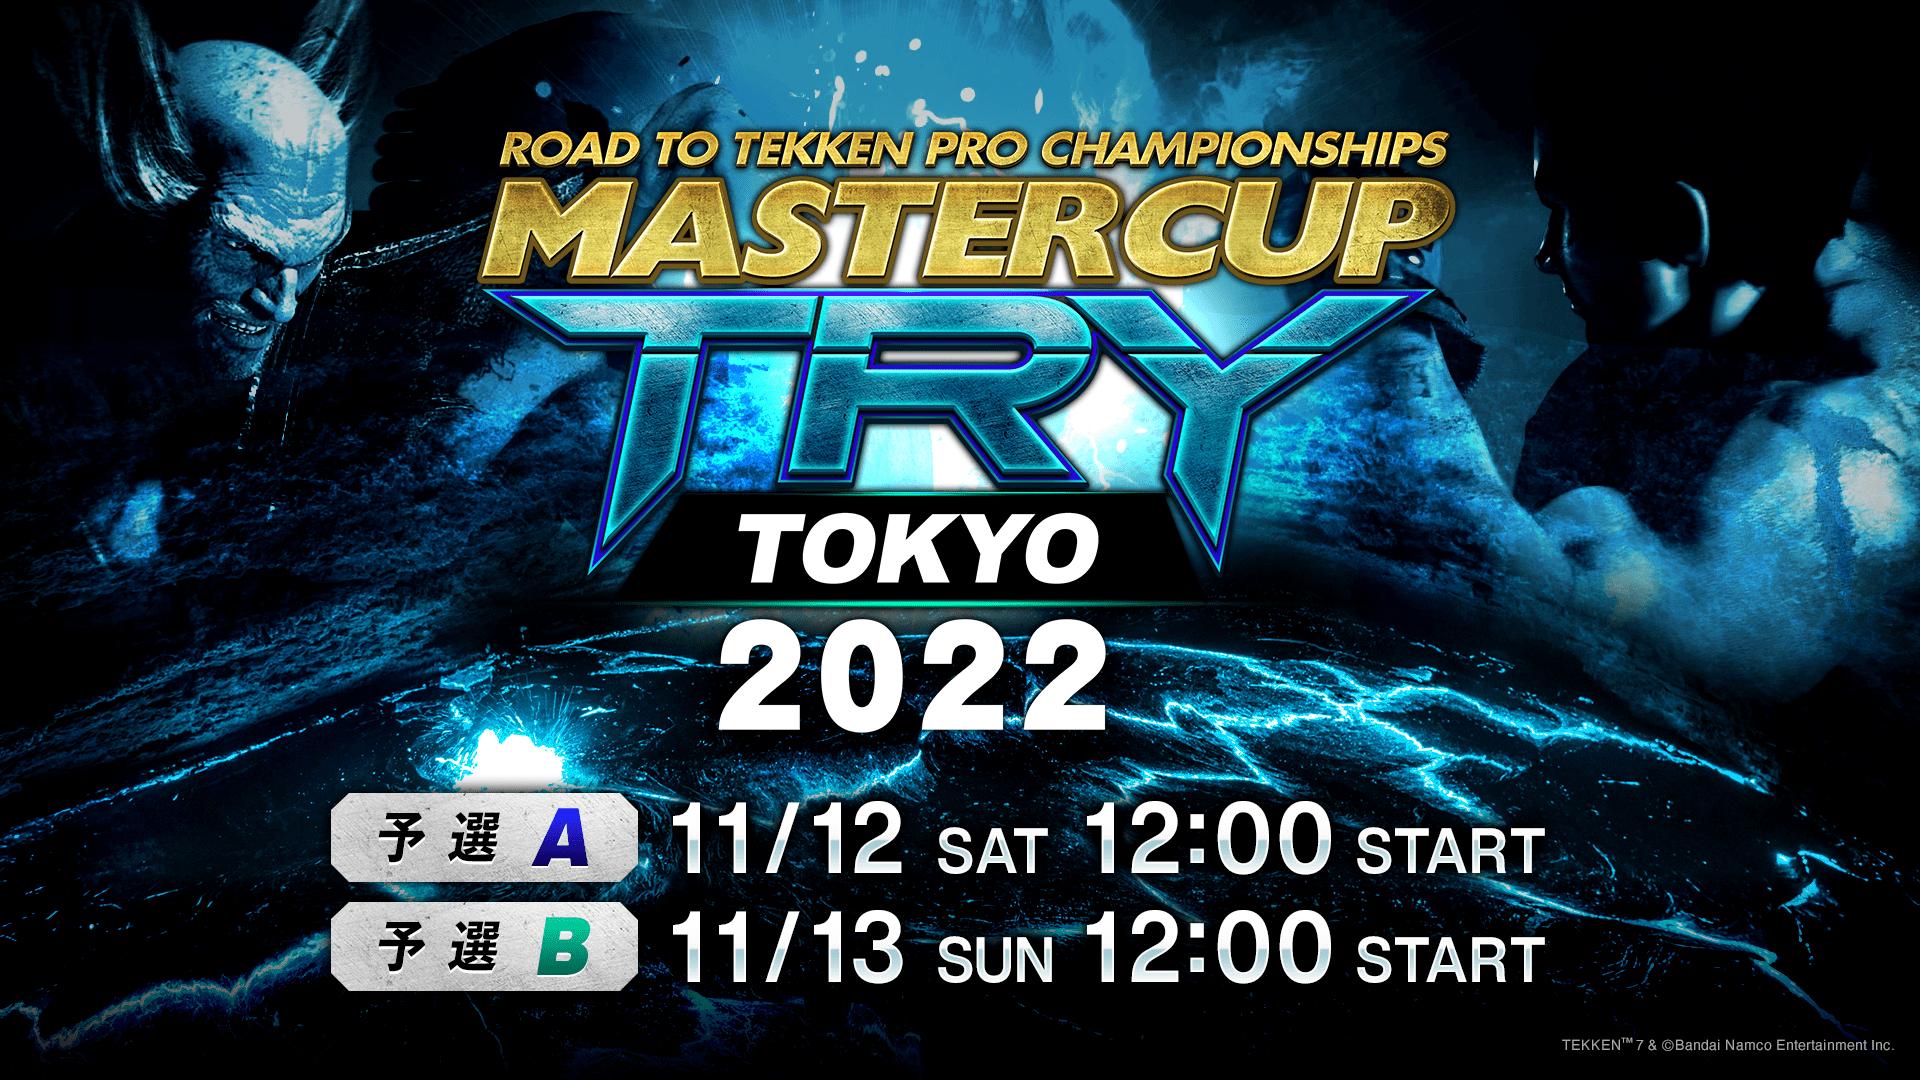 MASTERCUP TRY TOKYO 2022 feature image